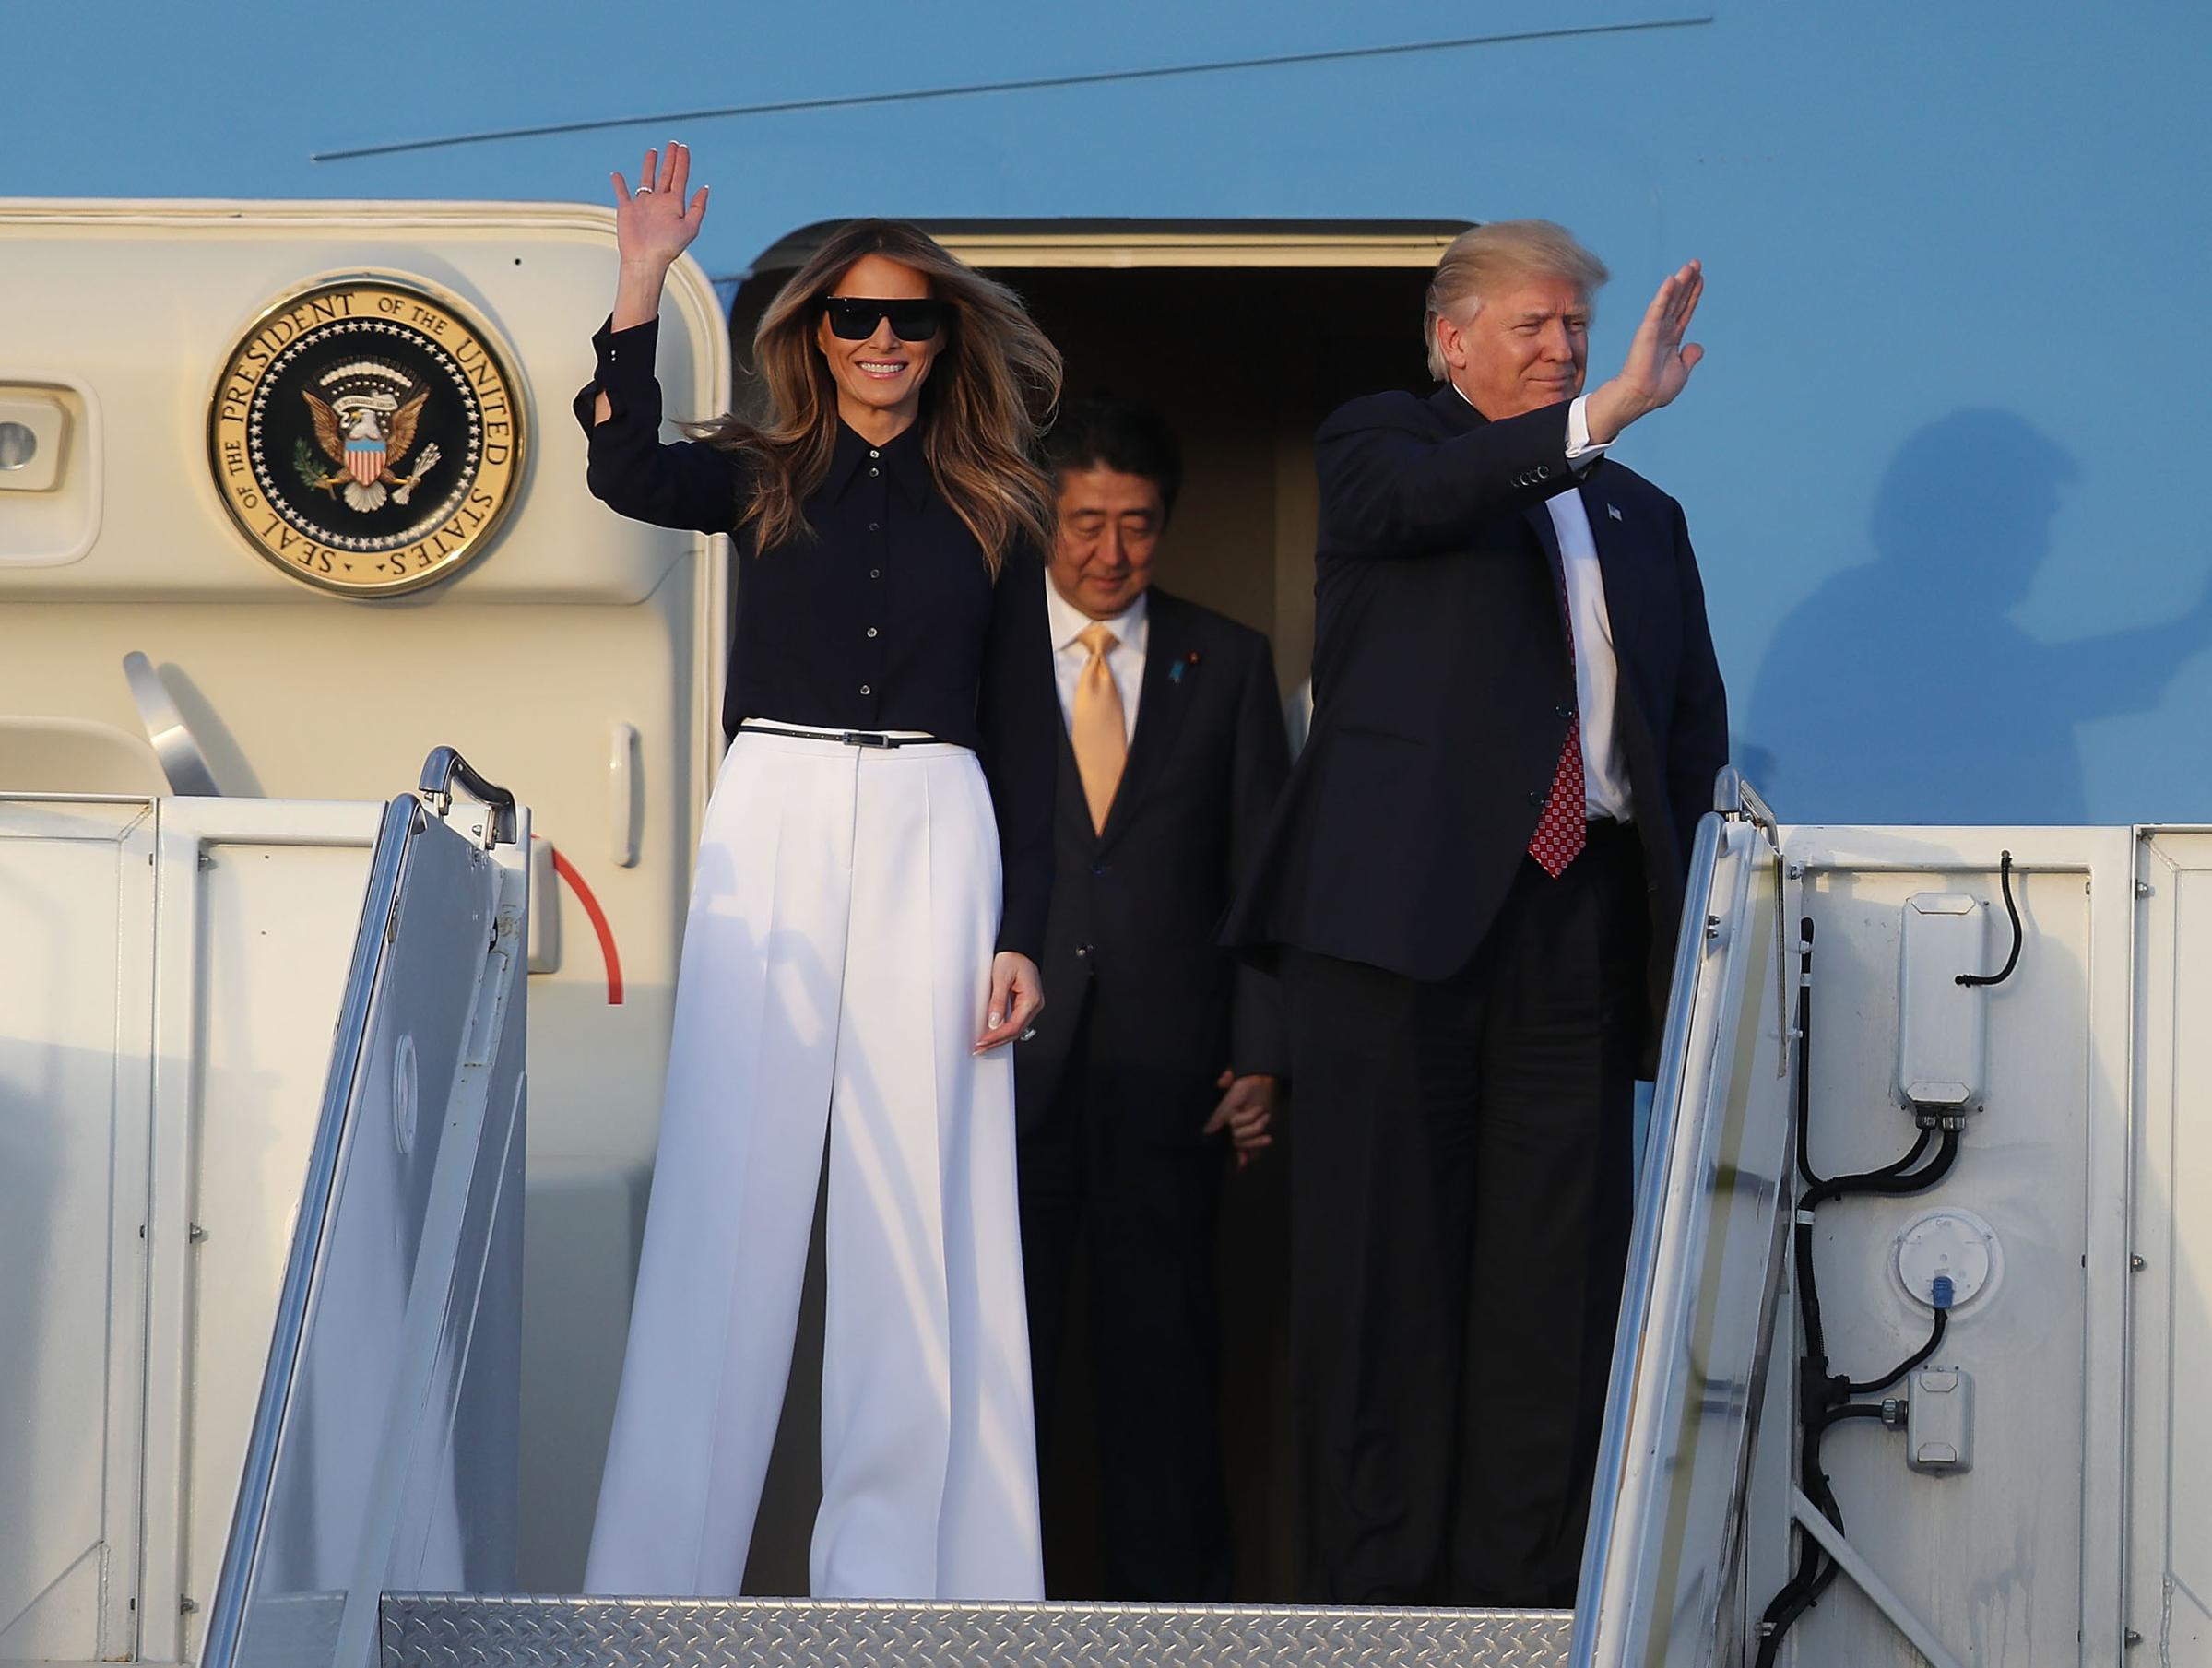 President Donald Trump and first lady Melania Trump , wearing black blouse and white wide-legged pants, arrive with Japanese Prime Minister Shinzo Abe on Air Force One at the Palm Beach International Airport Feb. 10, 2017 in West Palm Beach, Fla.